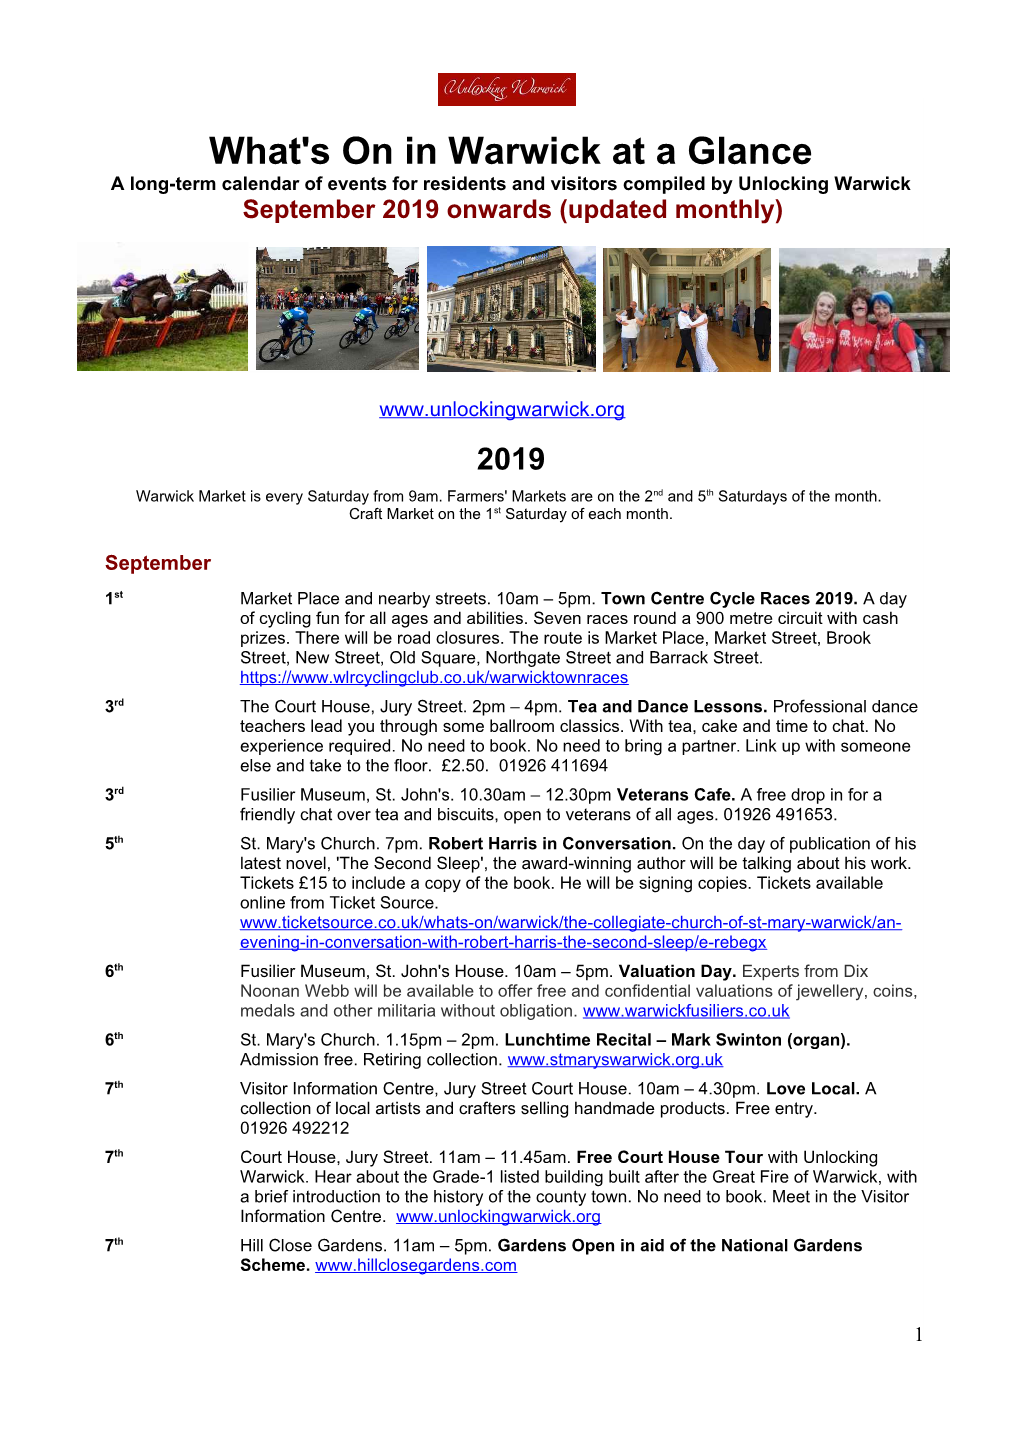 What's on in Warwick at a Glance a Long-Term Calendar of Events for Residents and Visitors Compiled by Unlocking Warwick September 2019 Onwards (Updated Monthly)